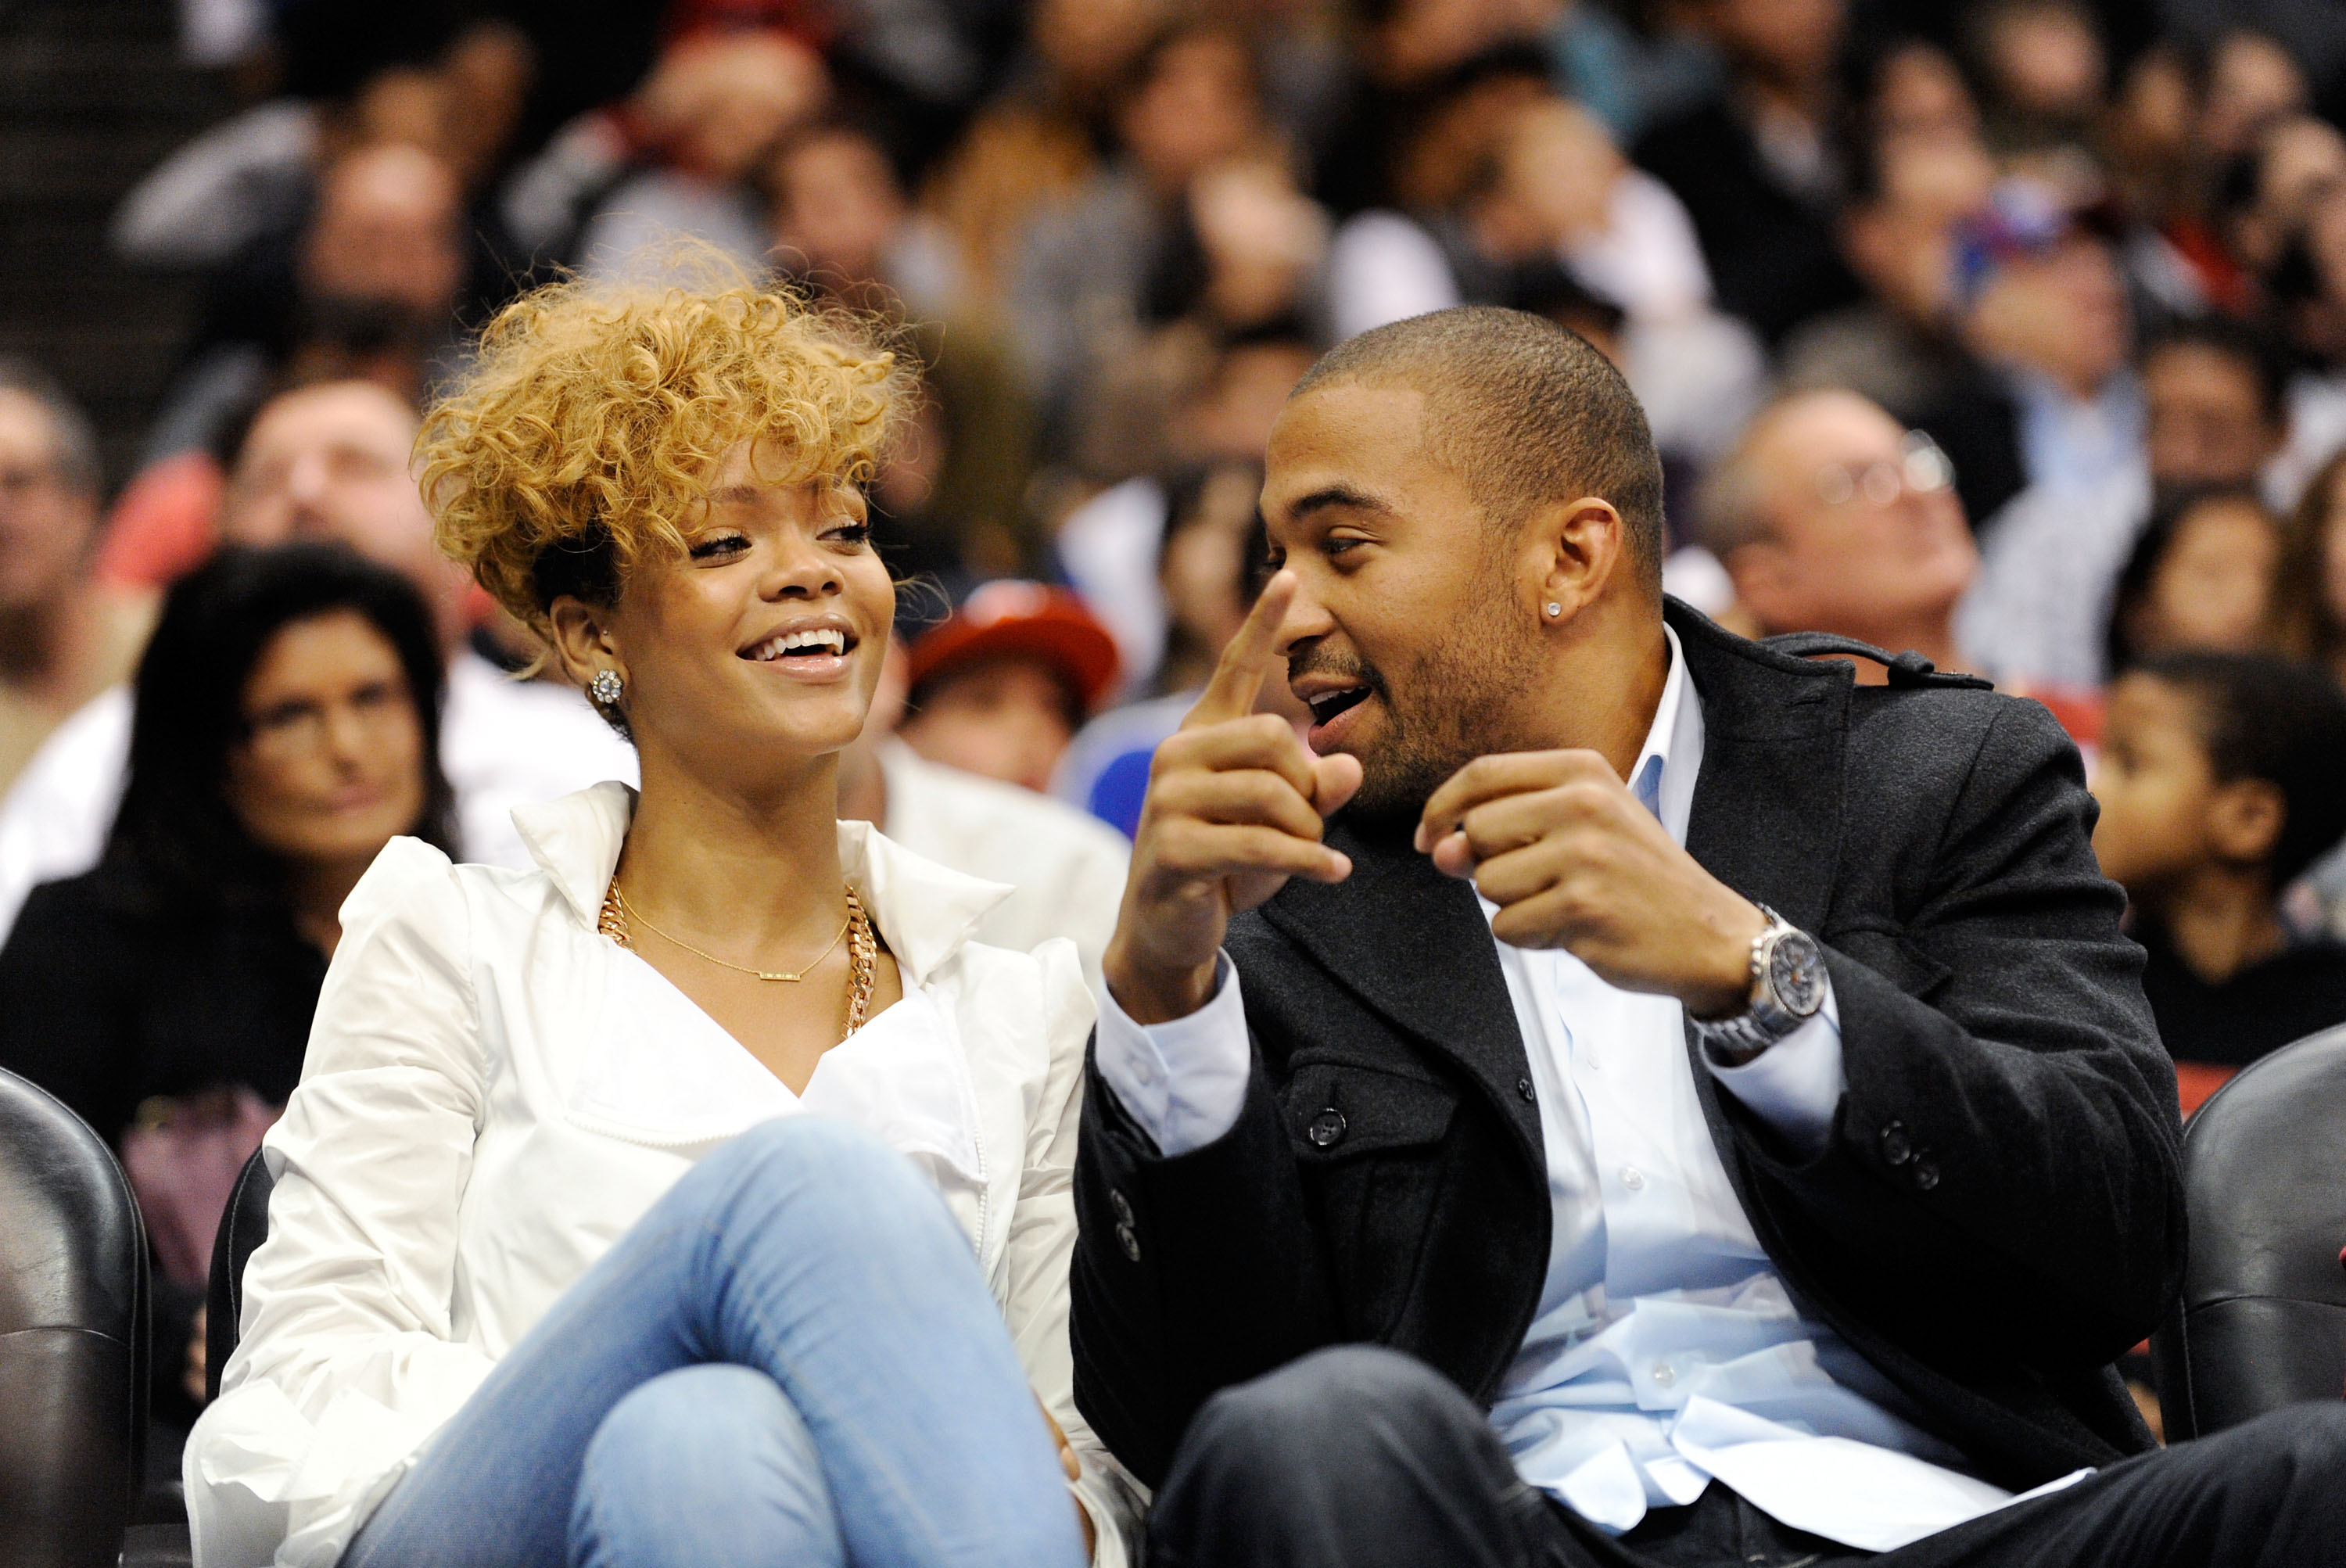 LOS ANGELES, CA - JANUARY 16:  Singers Rihanna and Matt Kemp outfileder of the Los Angeles Dodgers baseball team attend Cleveland Caveliers and  Los Angeles Clippers NBA basketball game at Staples Center on January 16, 2010 in Los Angeles, California. NOT